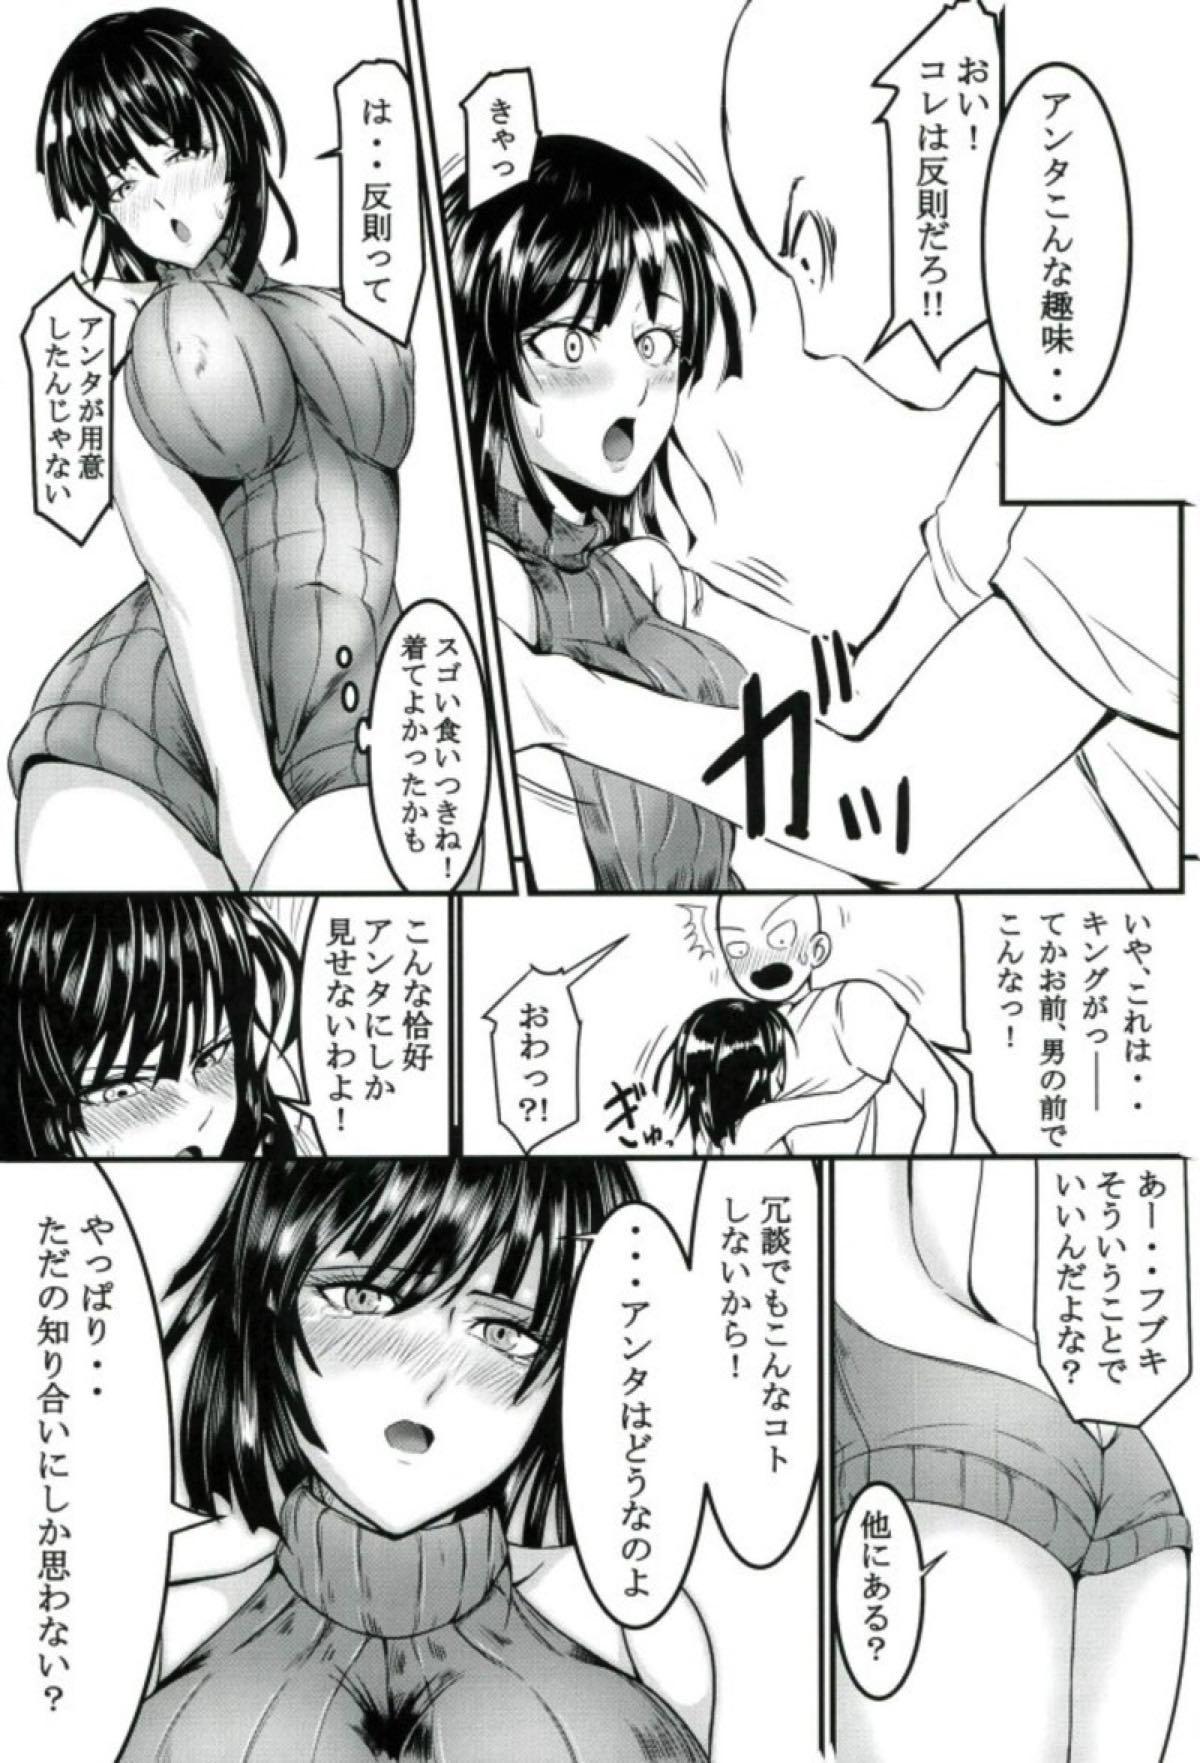 Toes Dekoboko Love Sister First Love - One punch man Gaypawn - Page 6